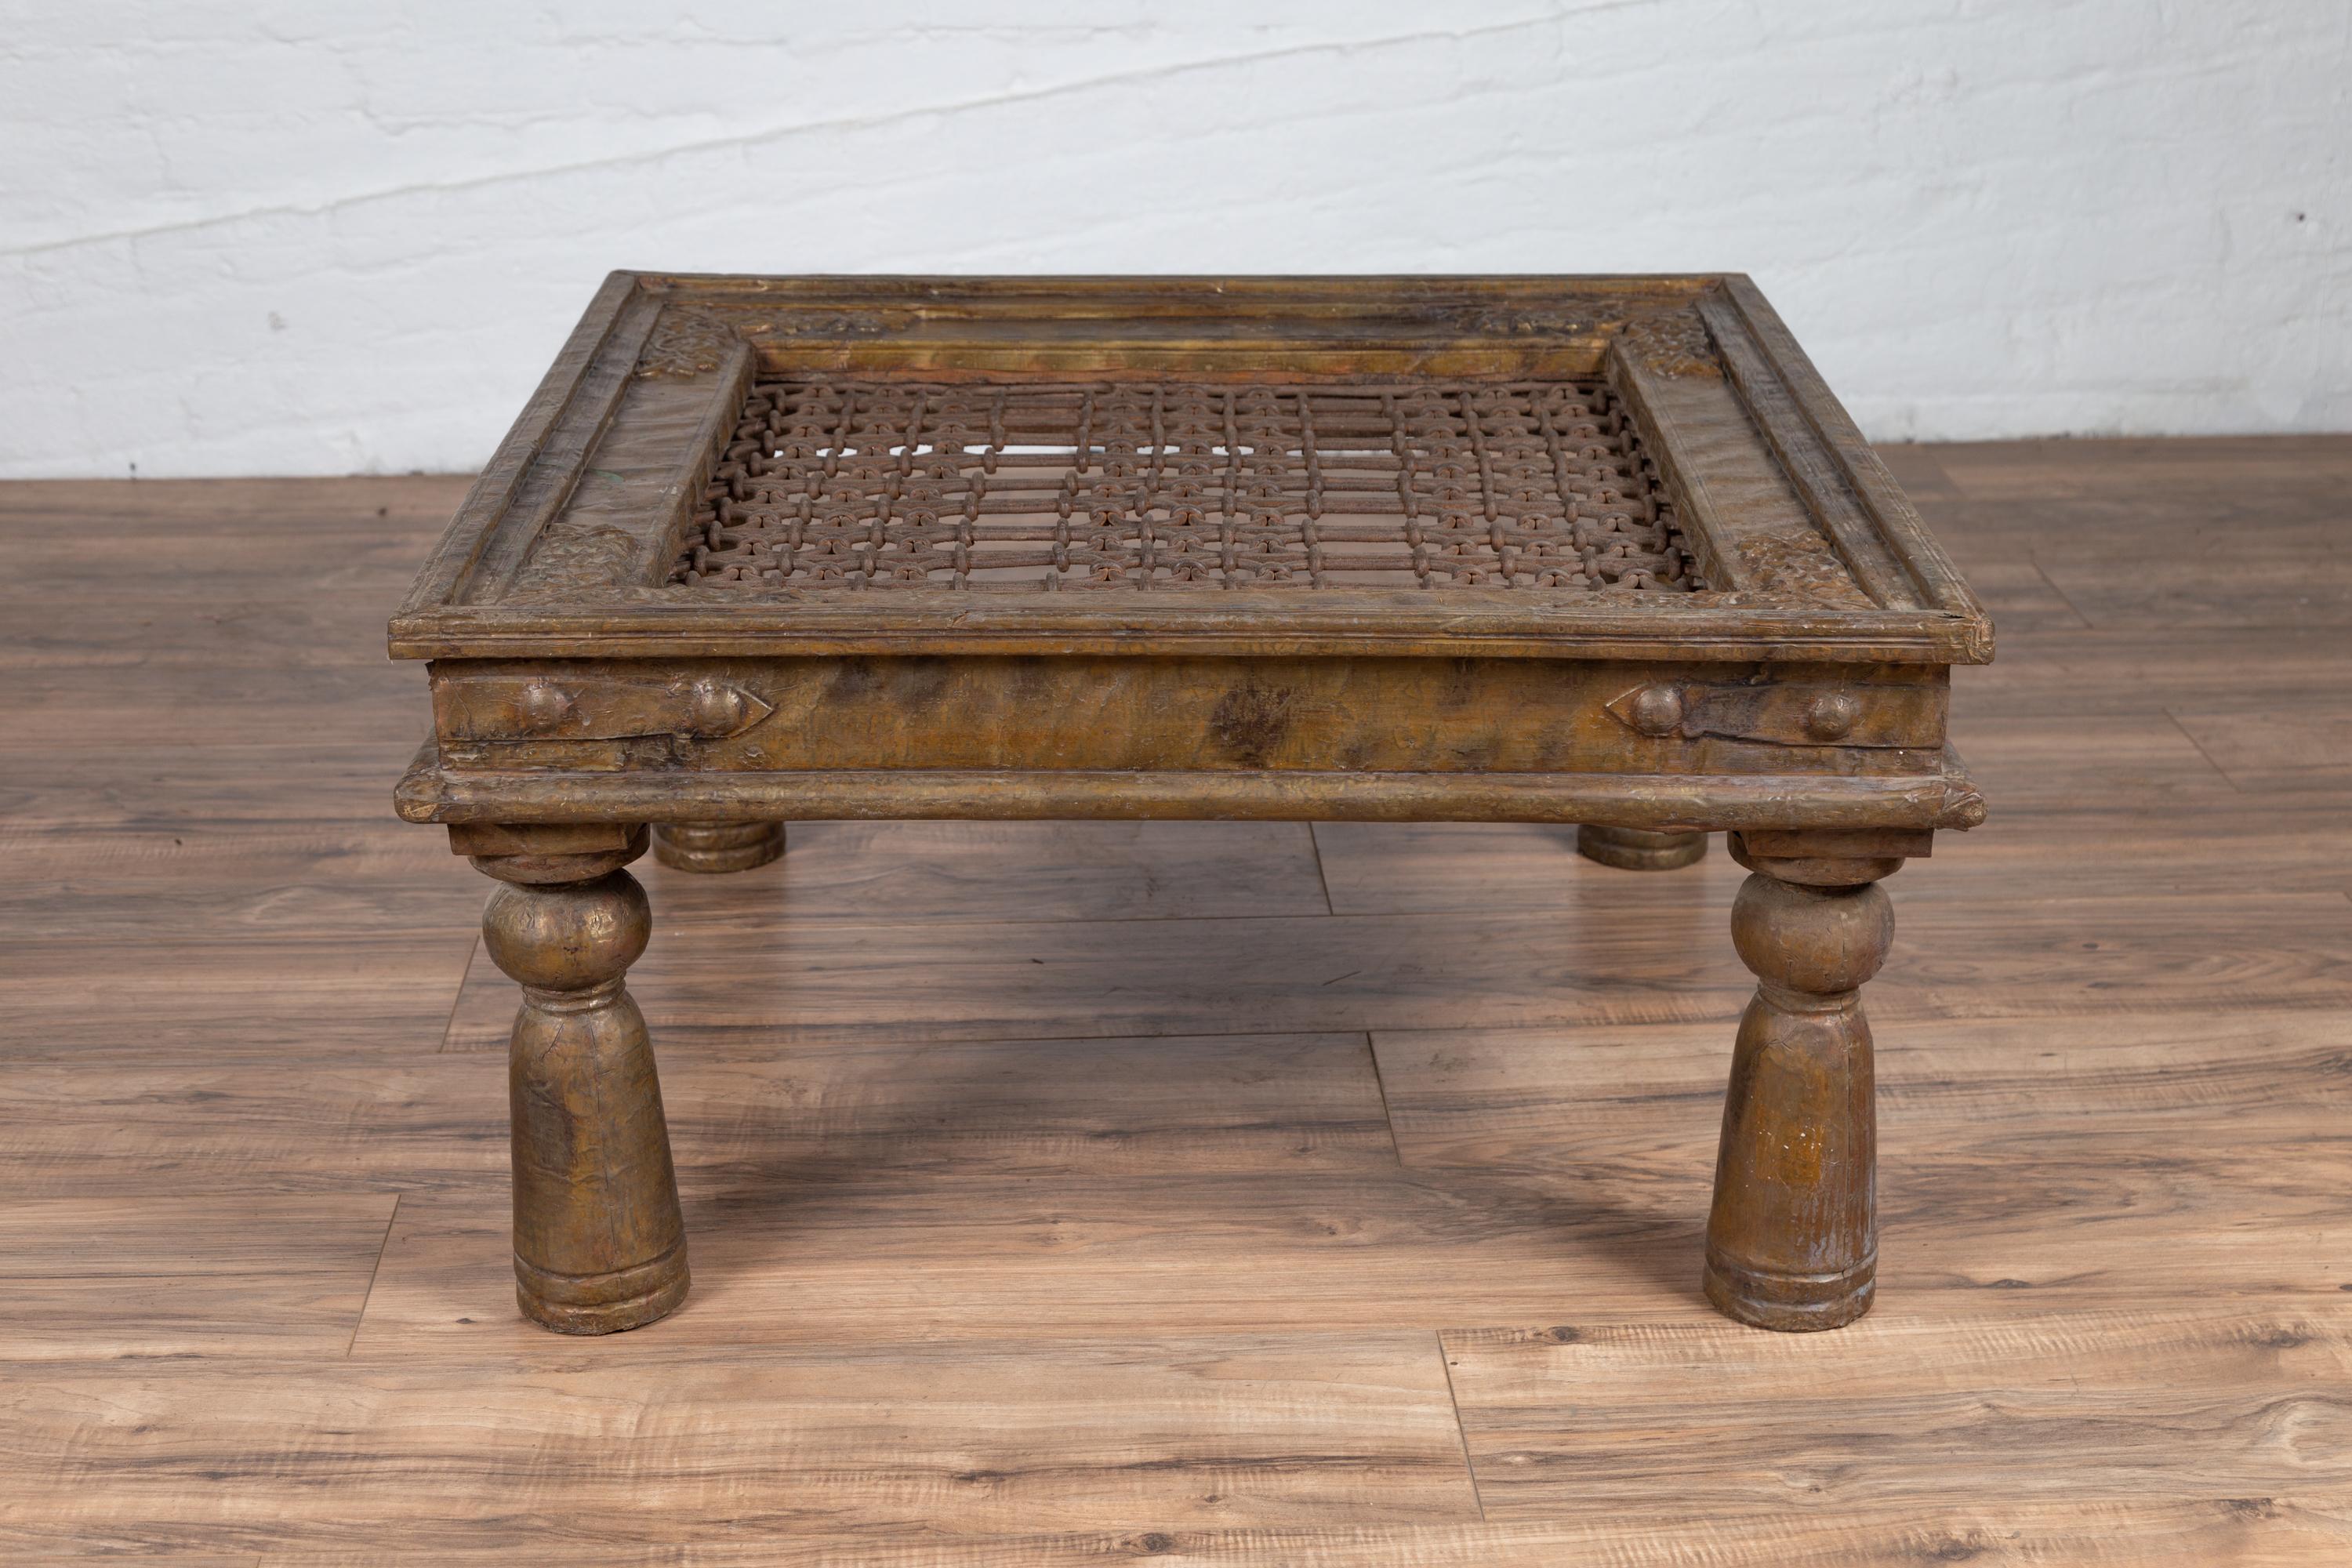 Antique Indian Brass Window Grate Coffee Table with Iron Geometric Design For Sale 4